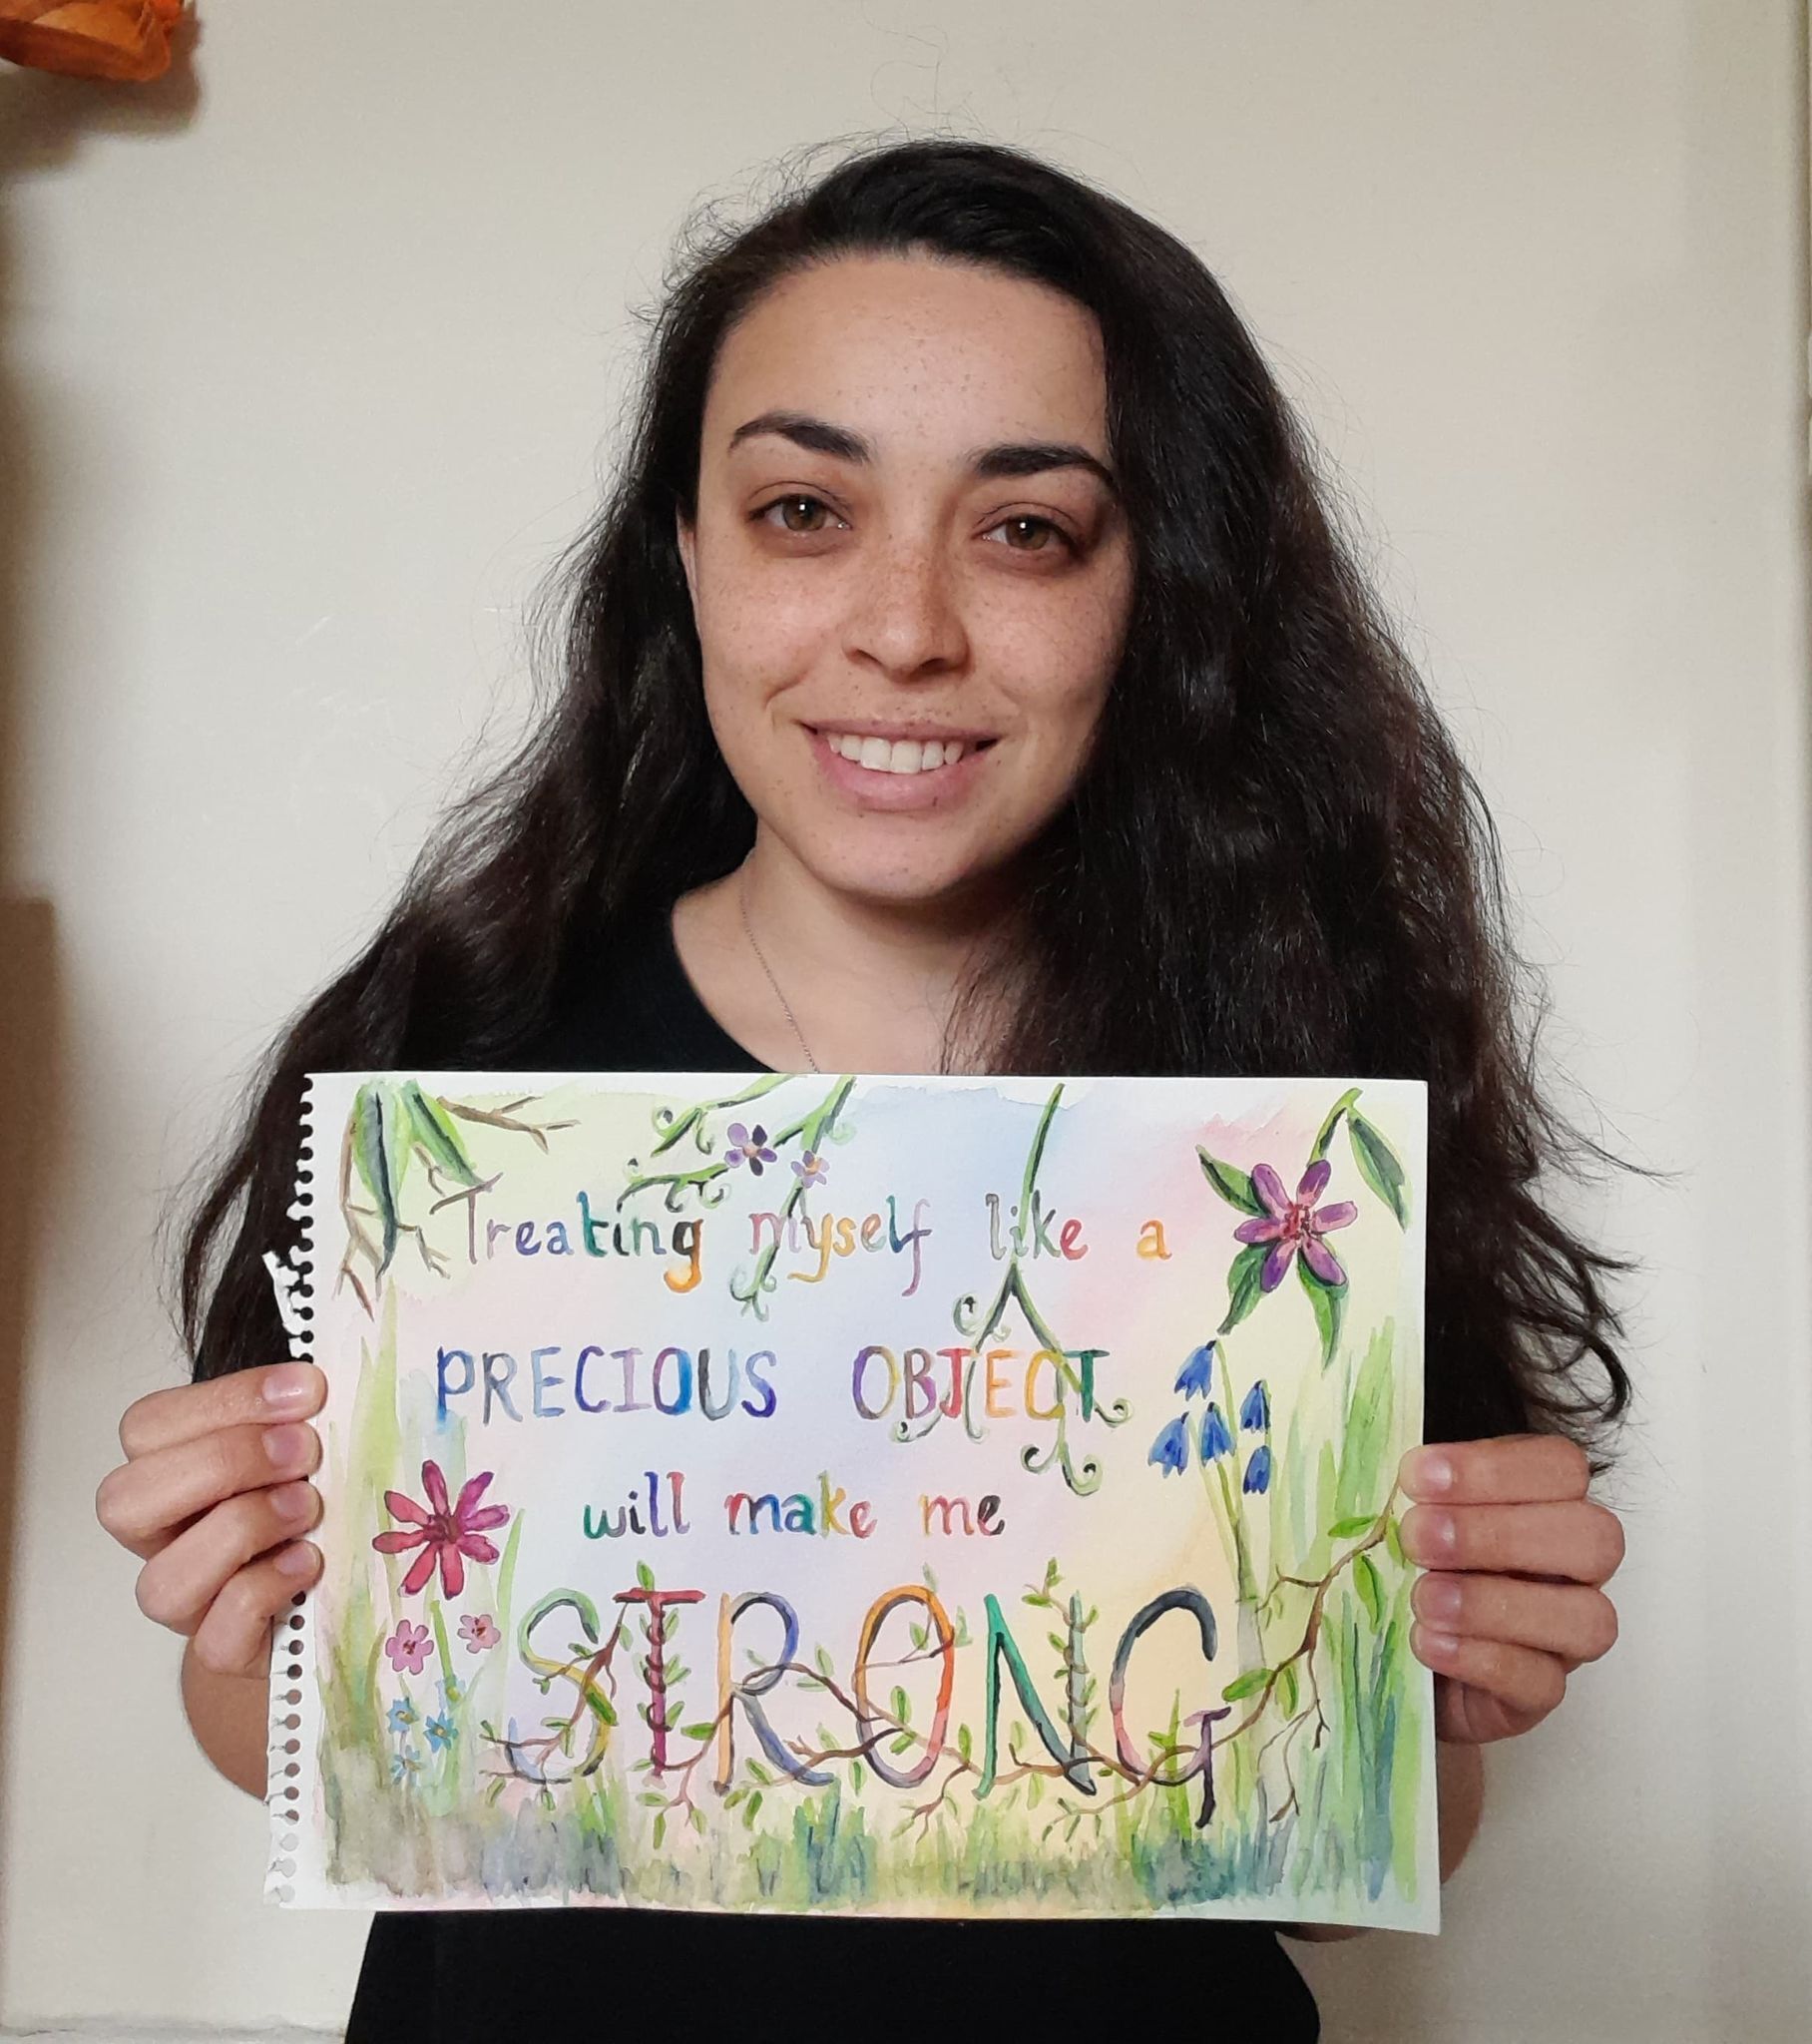 Alicia Ahmed with an activity which helps her maintain good mental health – painting 